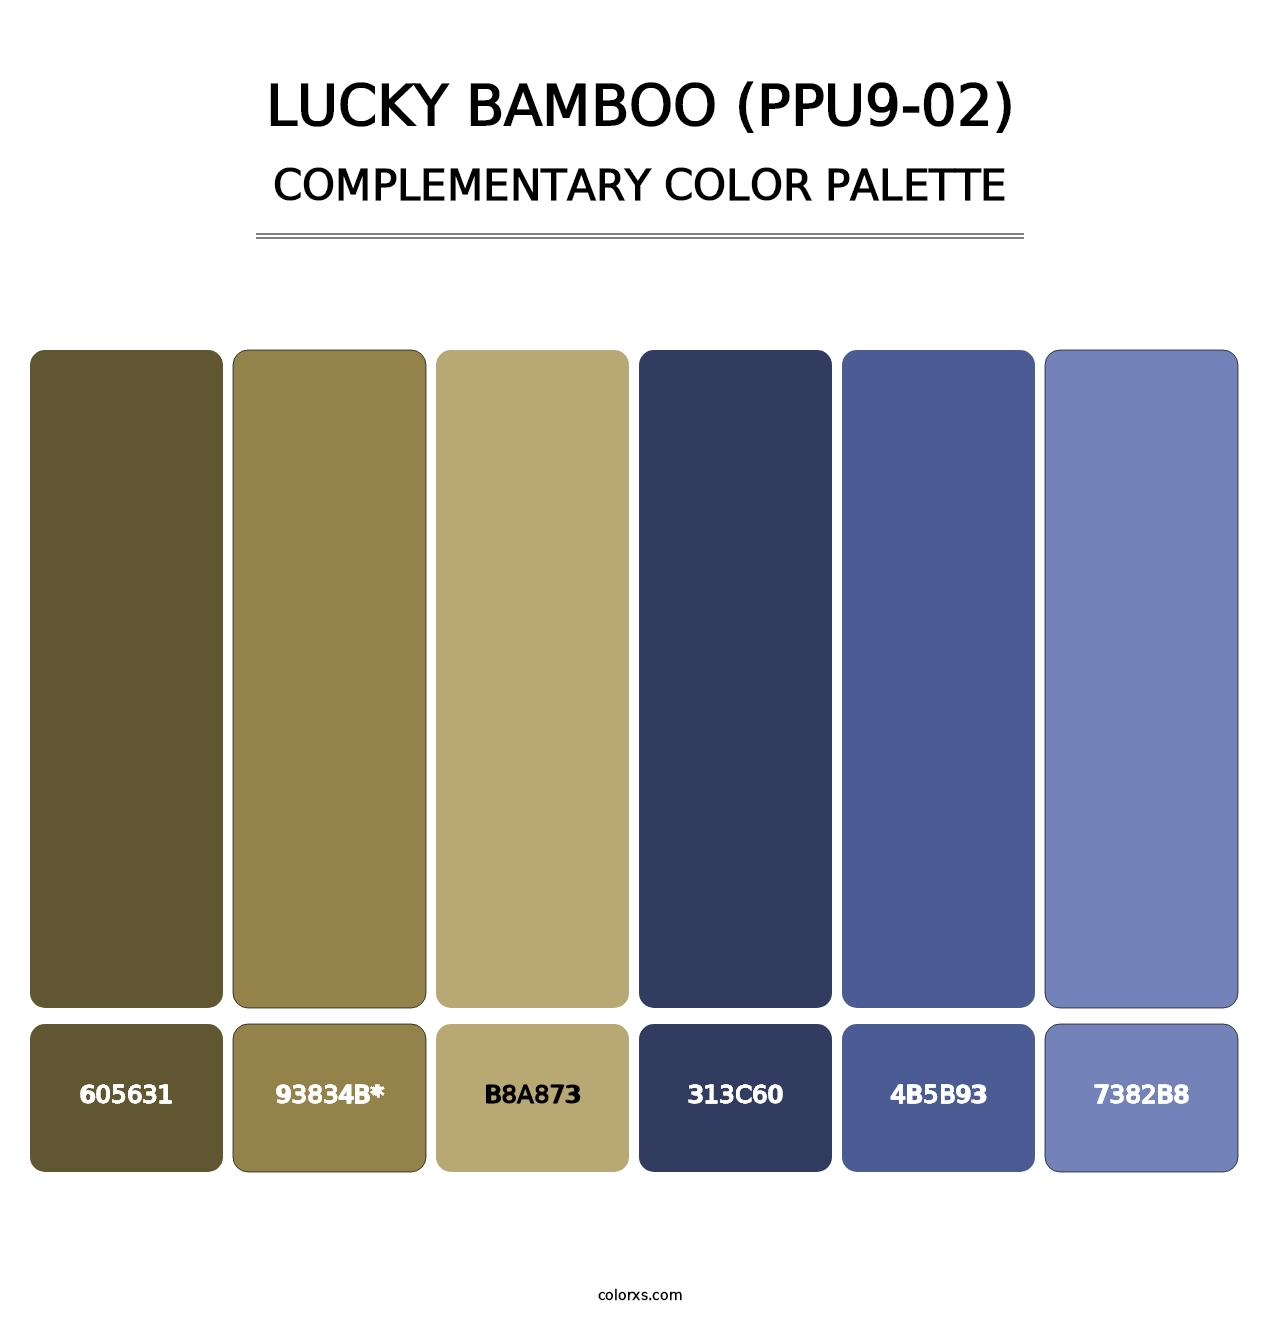 Lucky Bamboo (PPU9-02) - Complementary Color Palette